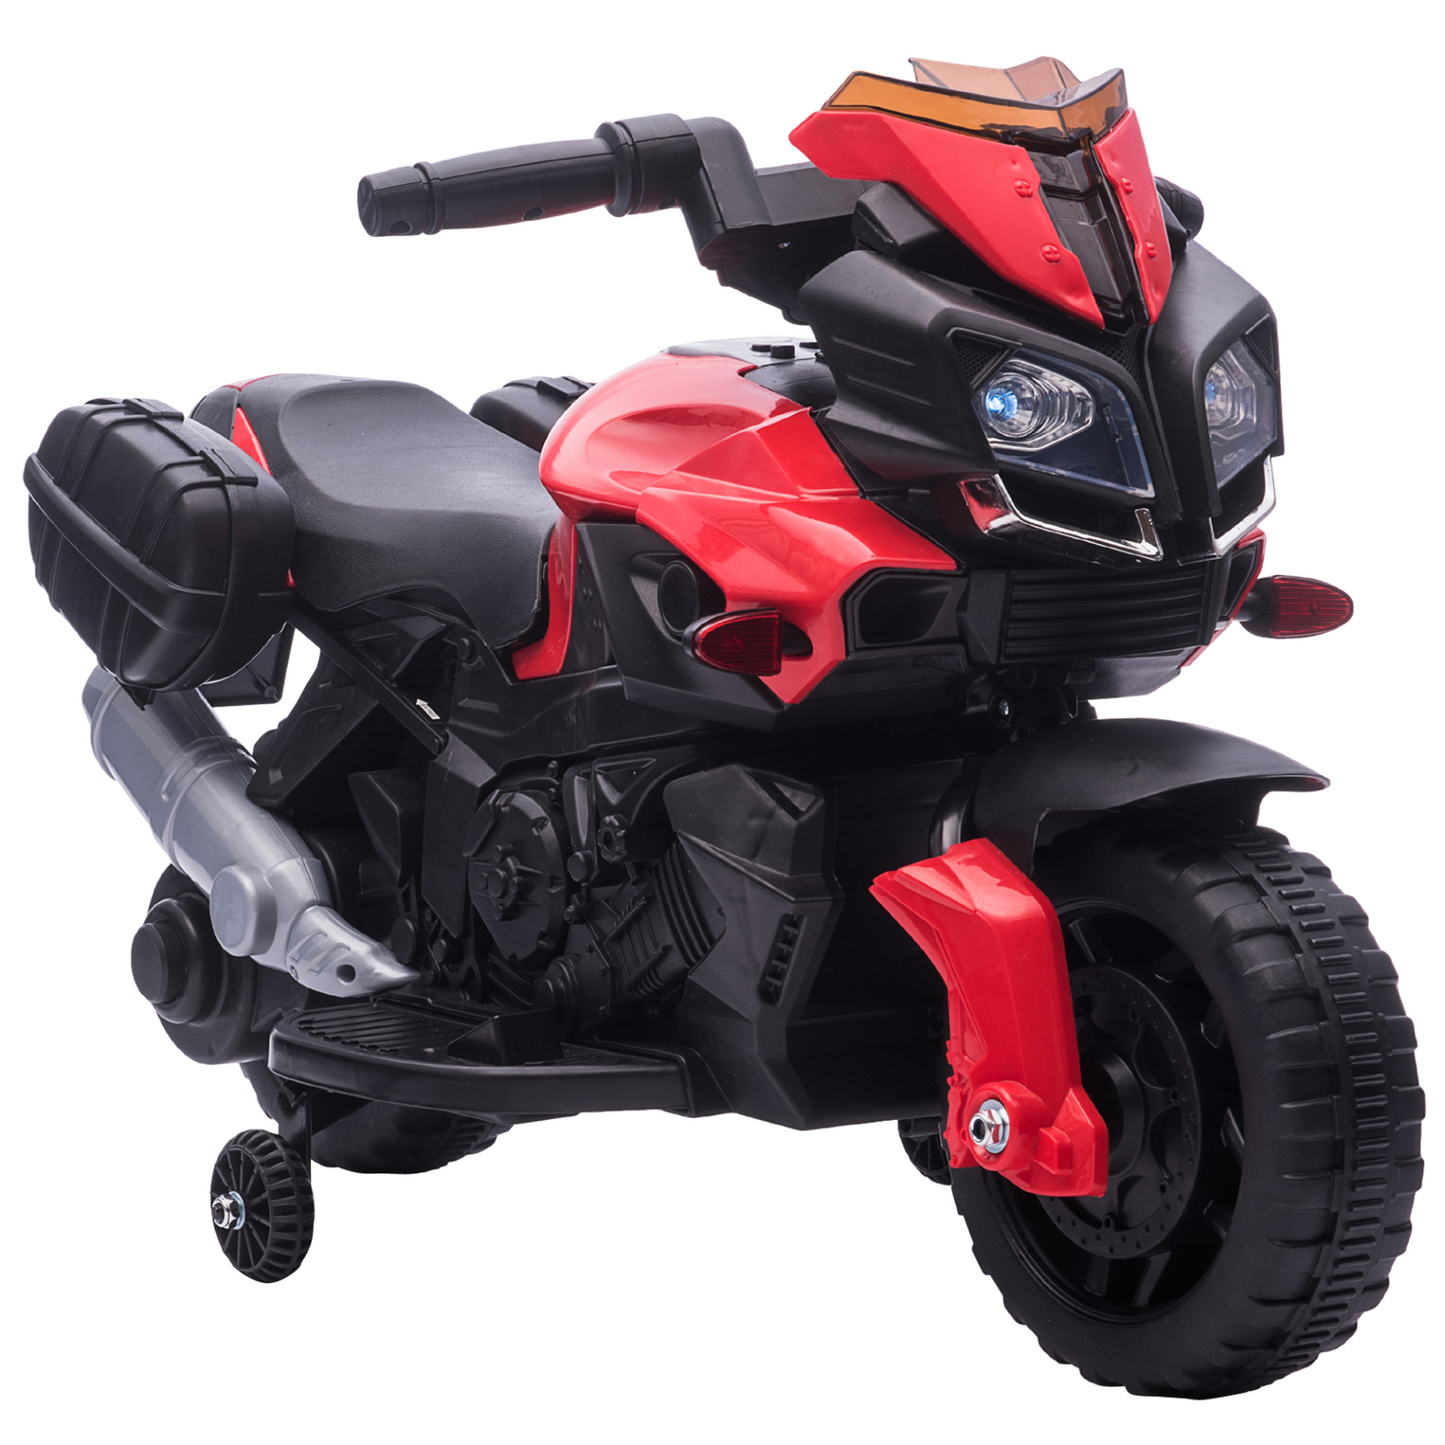 HOMCOM Kids 6V Electric Ride On Motorcycle Vehicle w/ Lights Horn Realistic Sounds Outdoor Play Toy for 1.5-4 Years Old Red